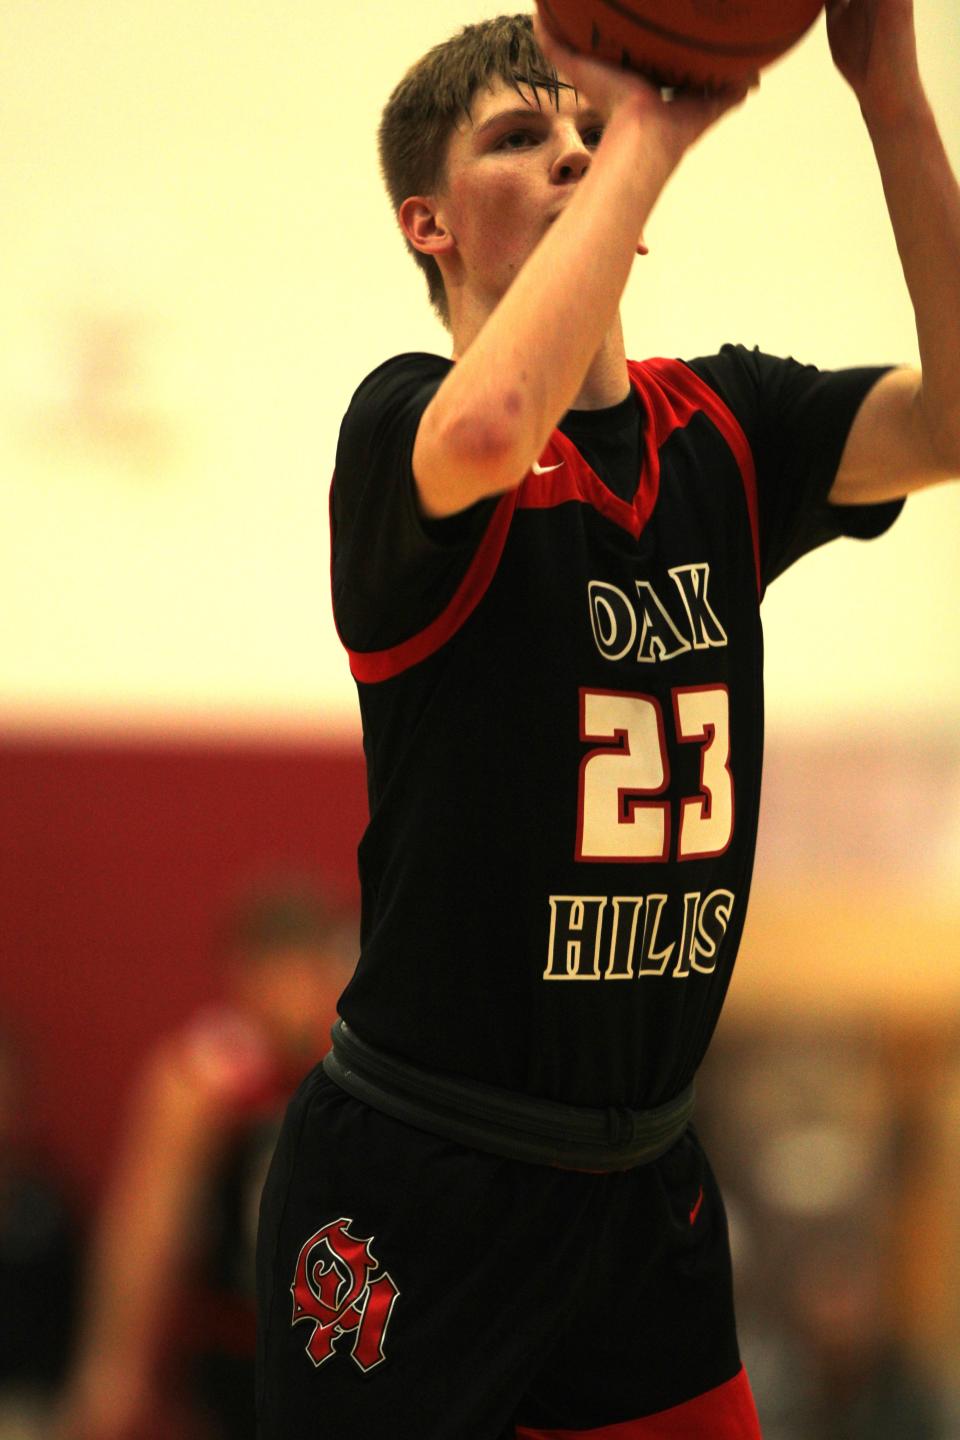 Henry Maginn and two Oak Hills teamamtes will be in the all-star games April 5.